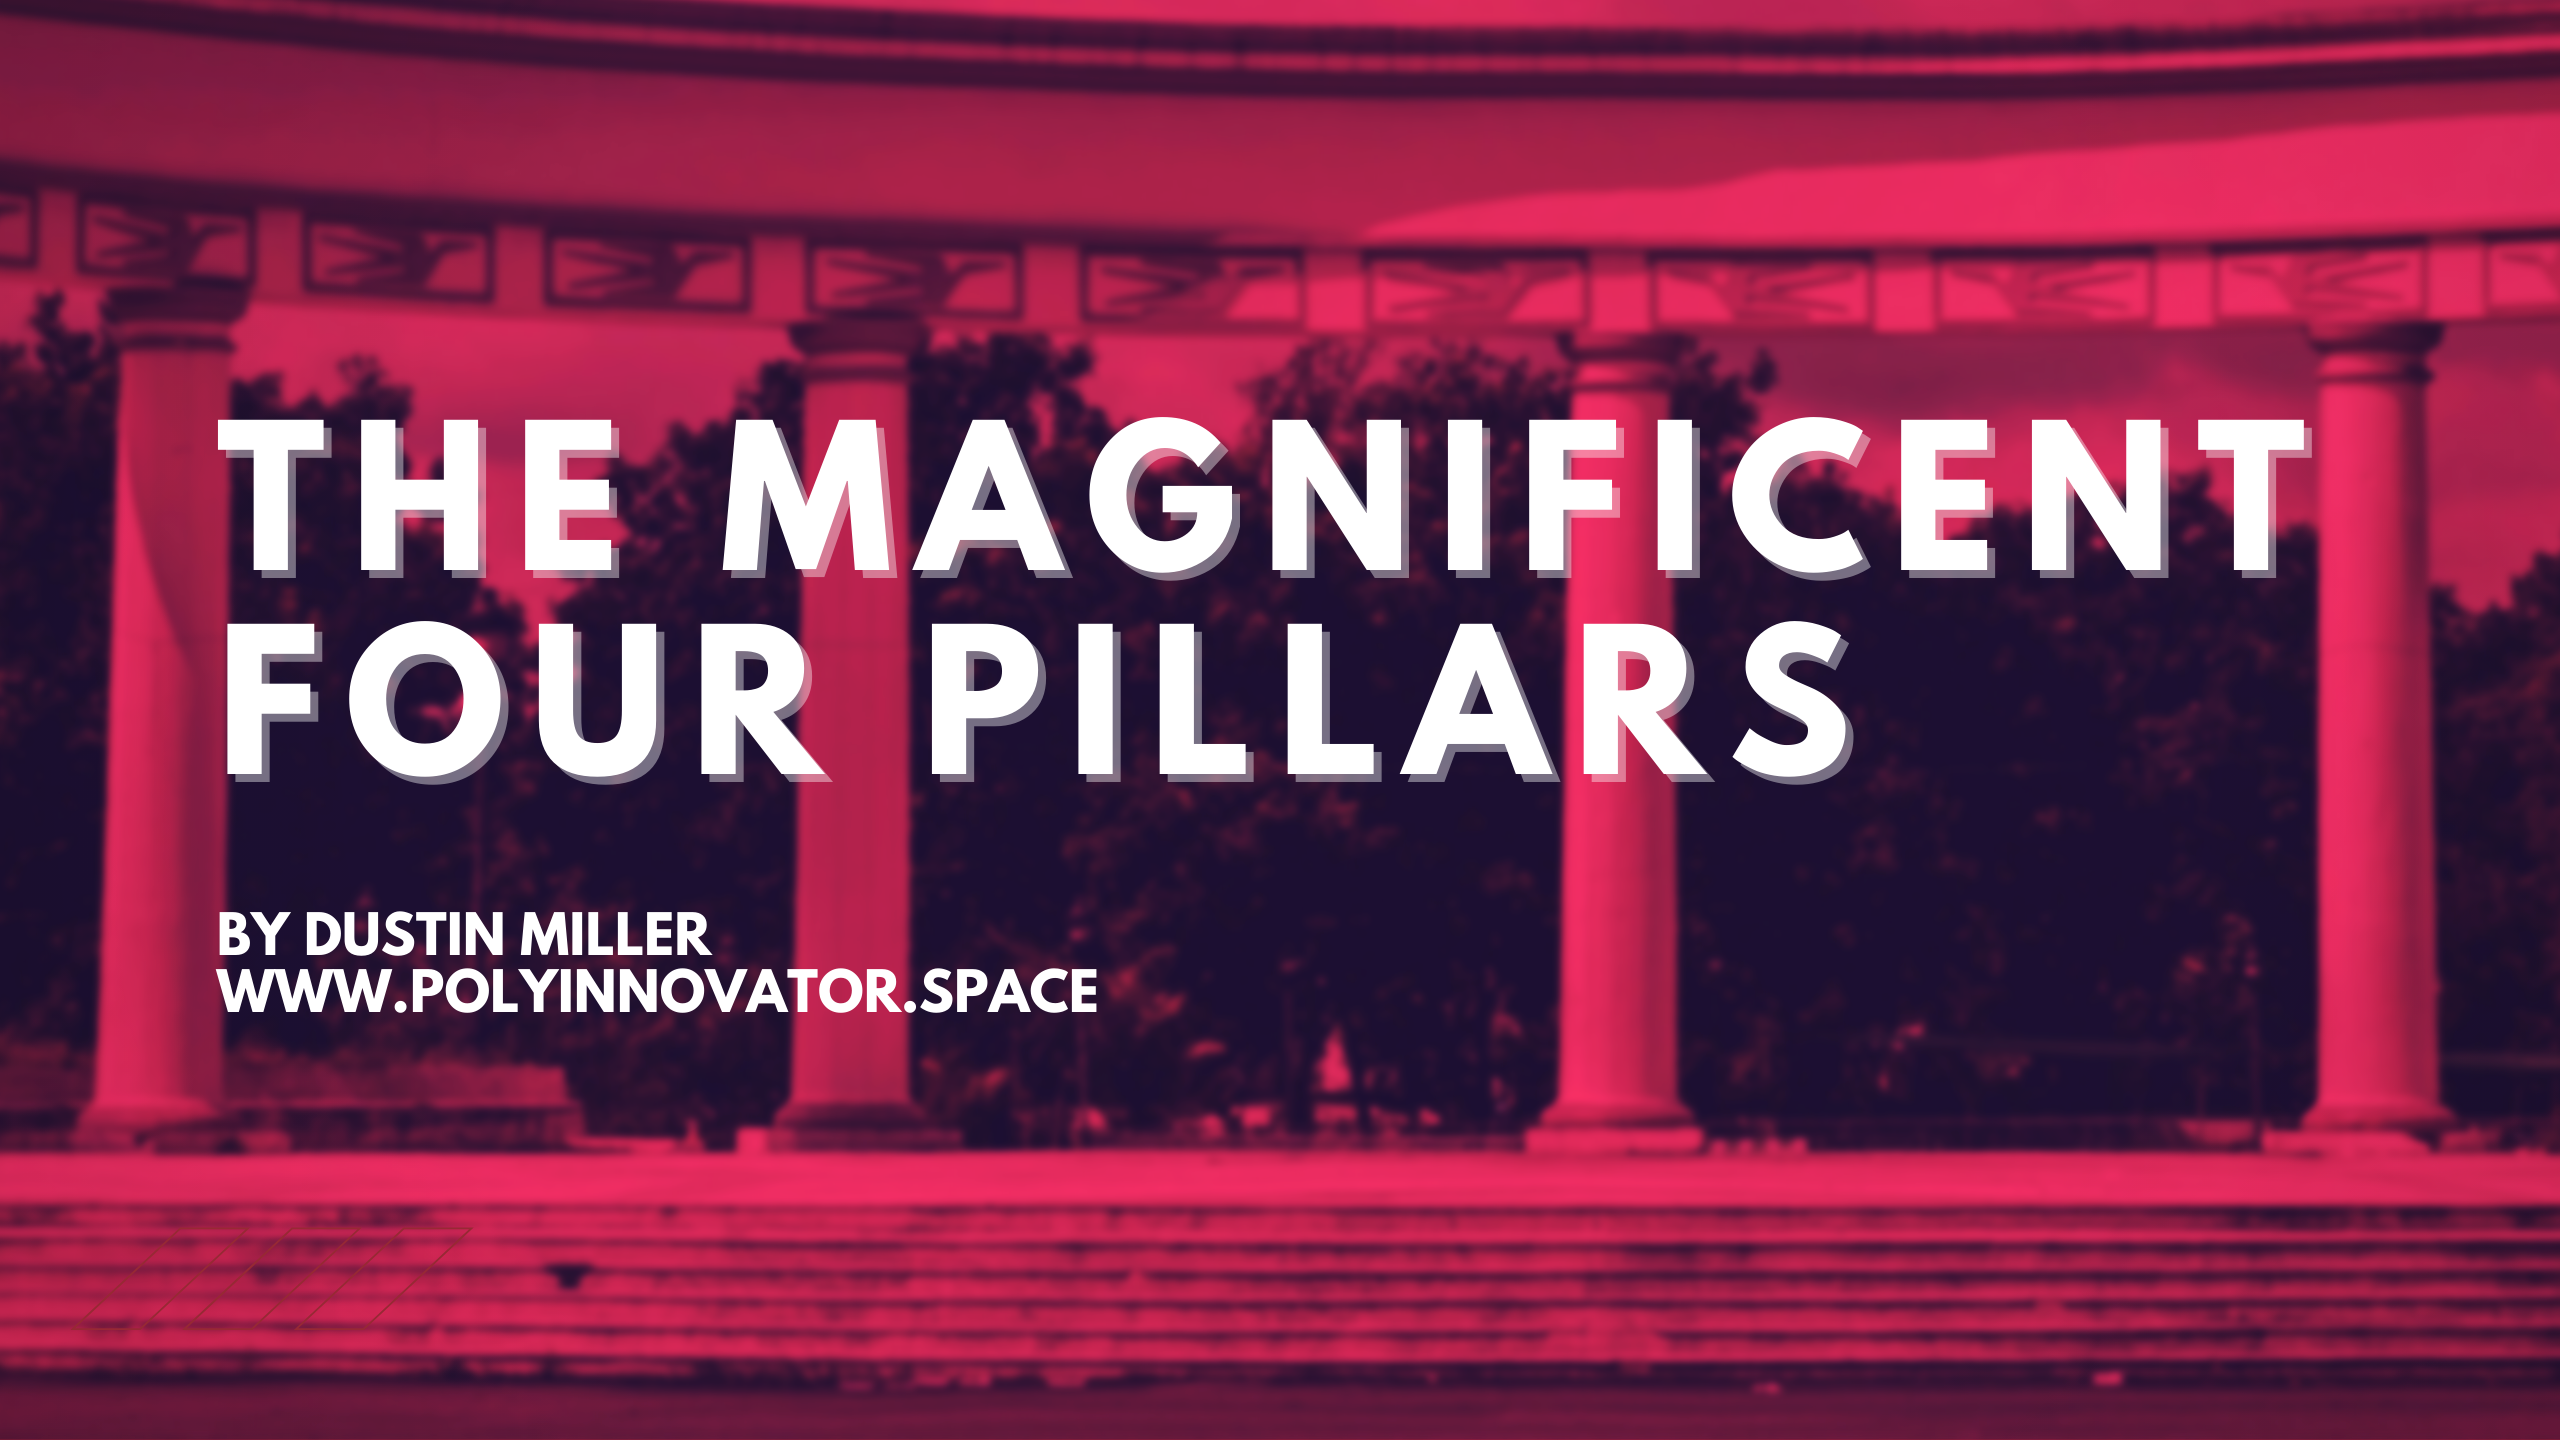 The Magnificent Four Pillars